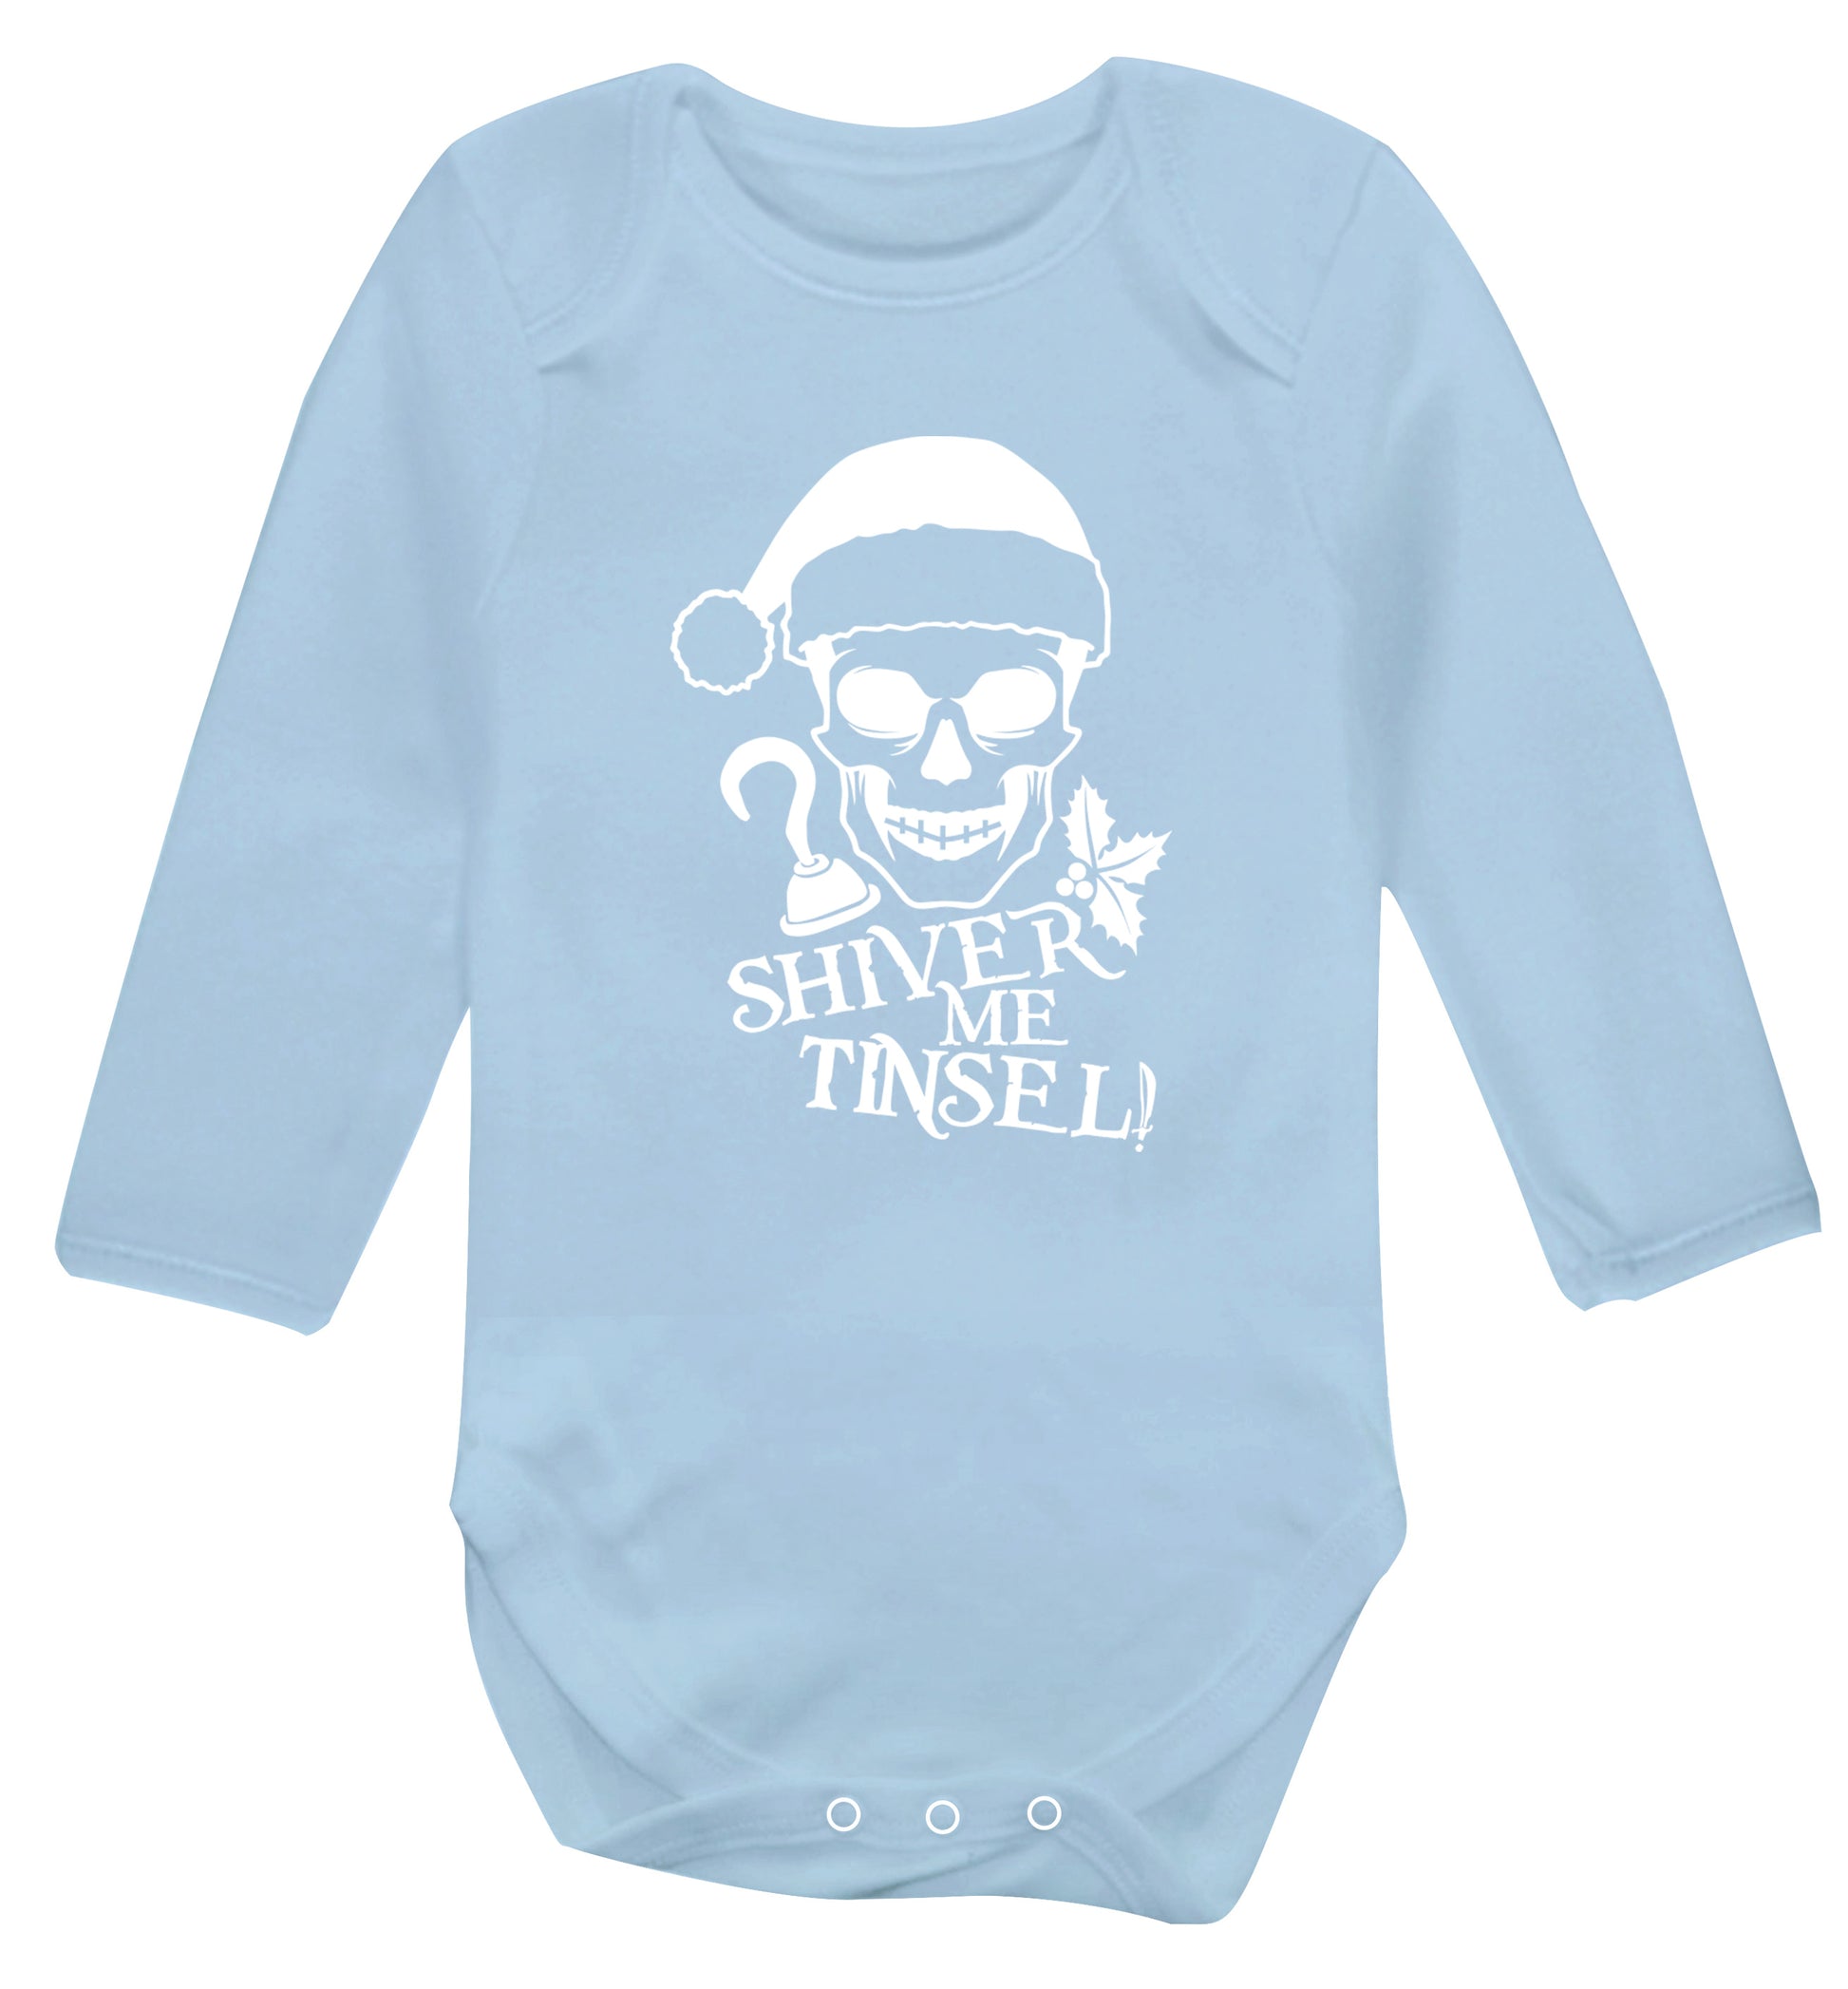 Shiver me tinsel Baby Vest long sleeved pale blue 6-12 months